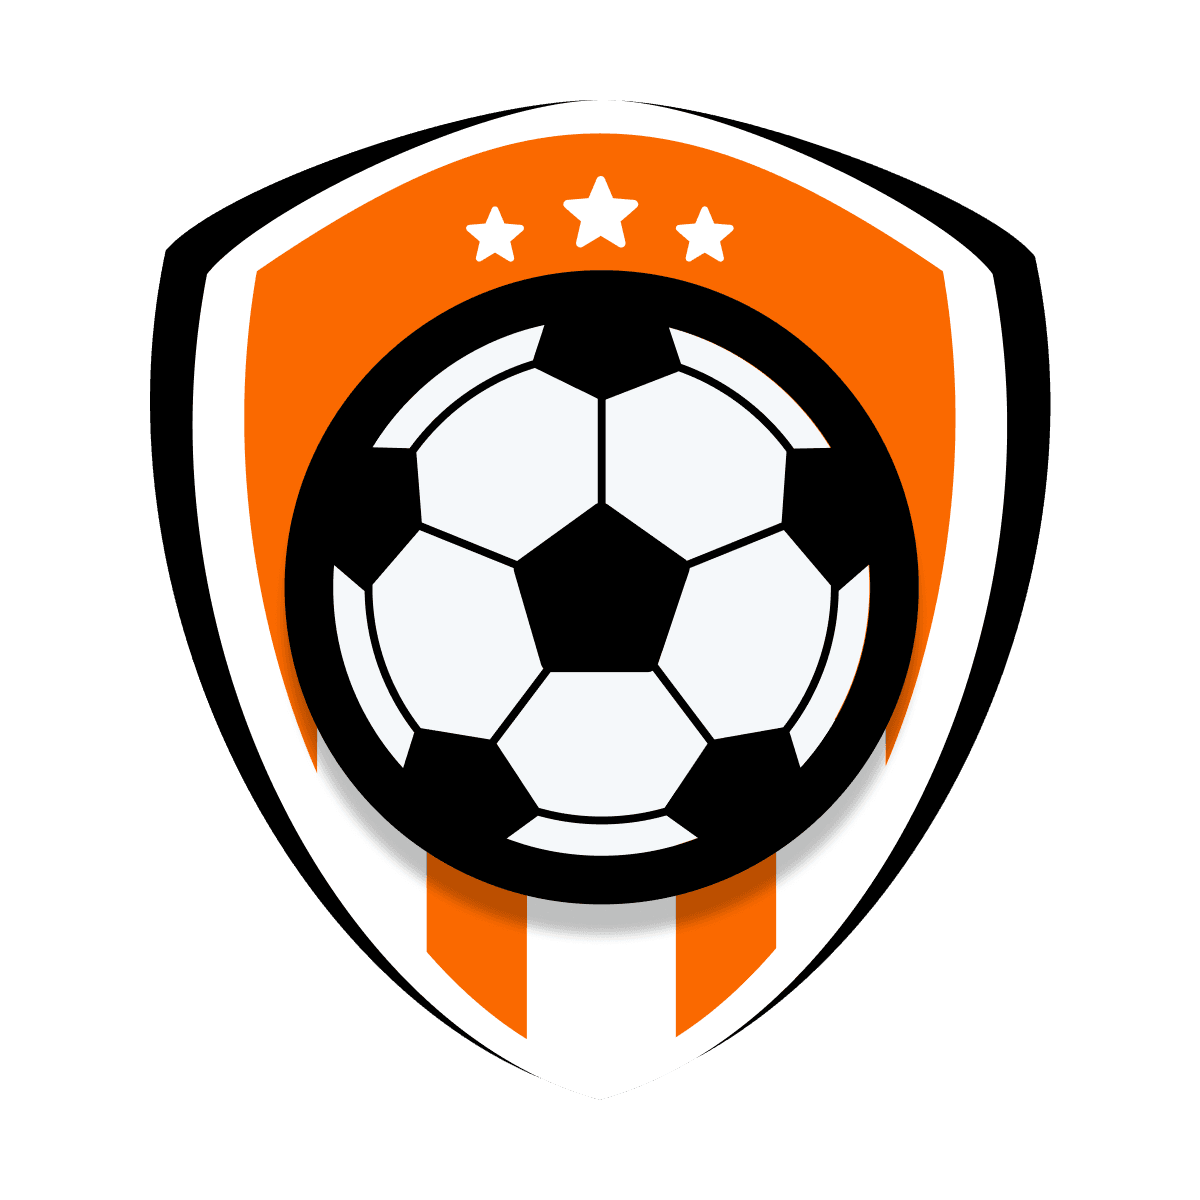 soccer club logos in simple and bold design styles